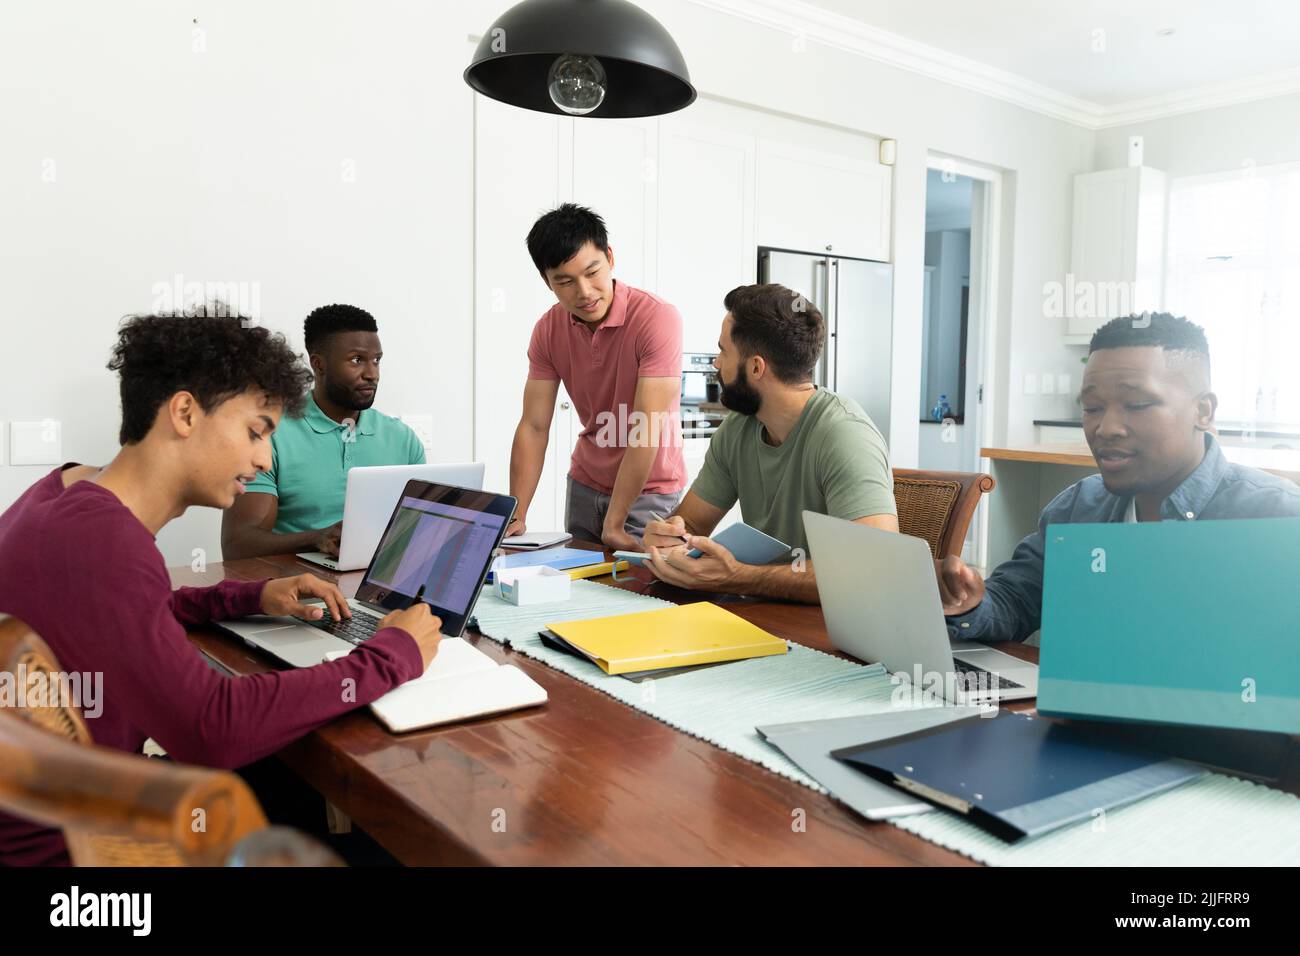 Multiracial male colleagues discussing and co-working over laptops on desk in office, copy space Stock Photo